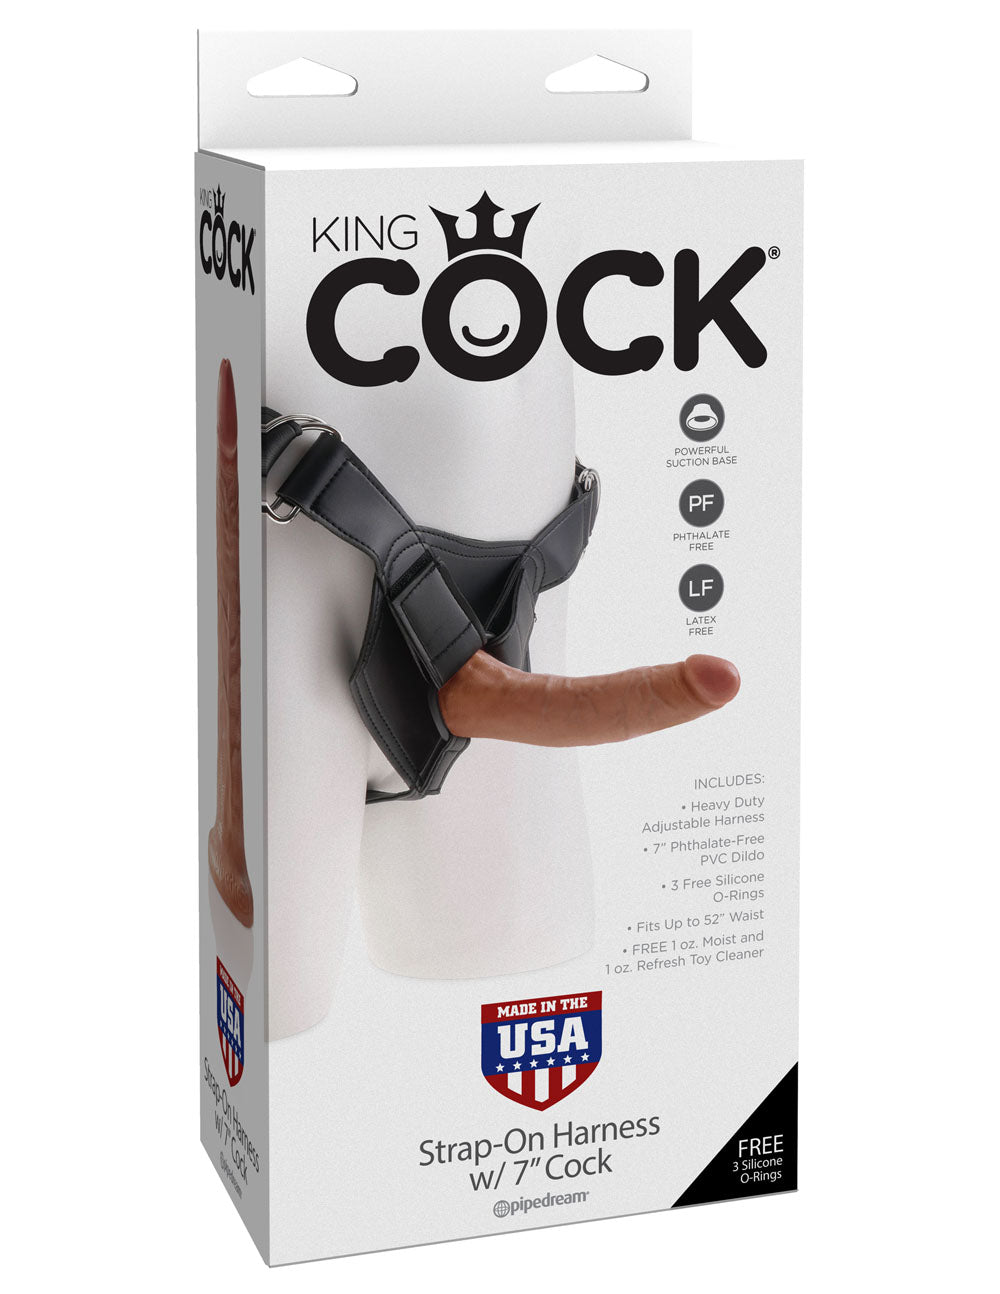 King Cock Strap-On Harness w/ Cock